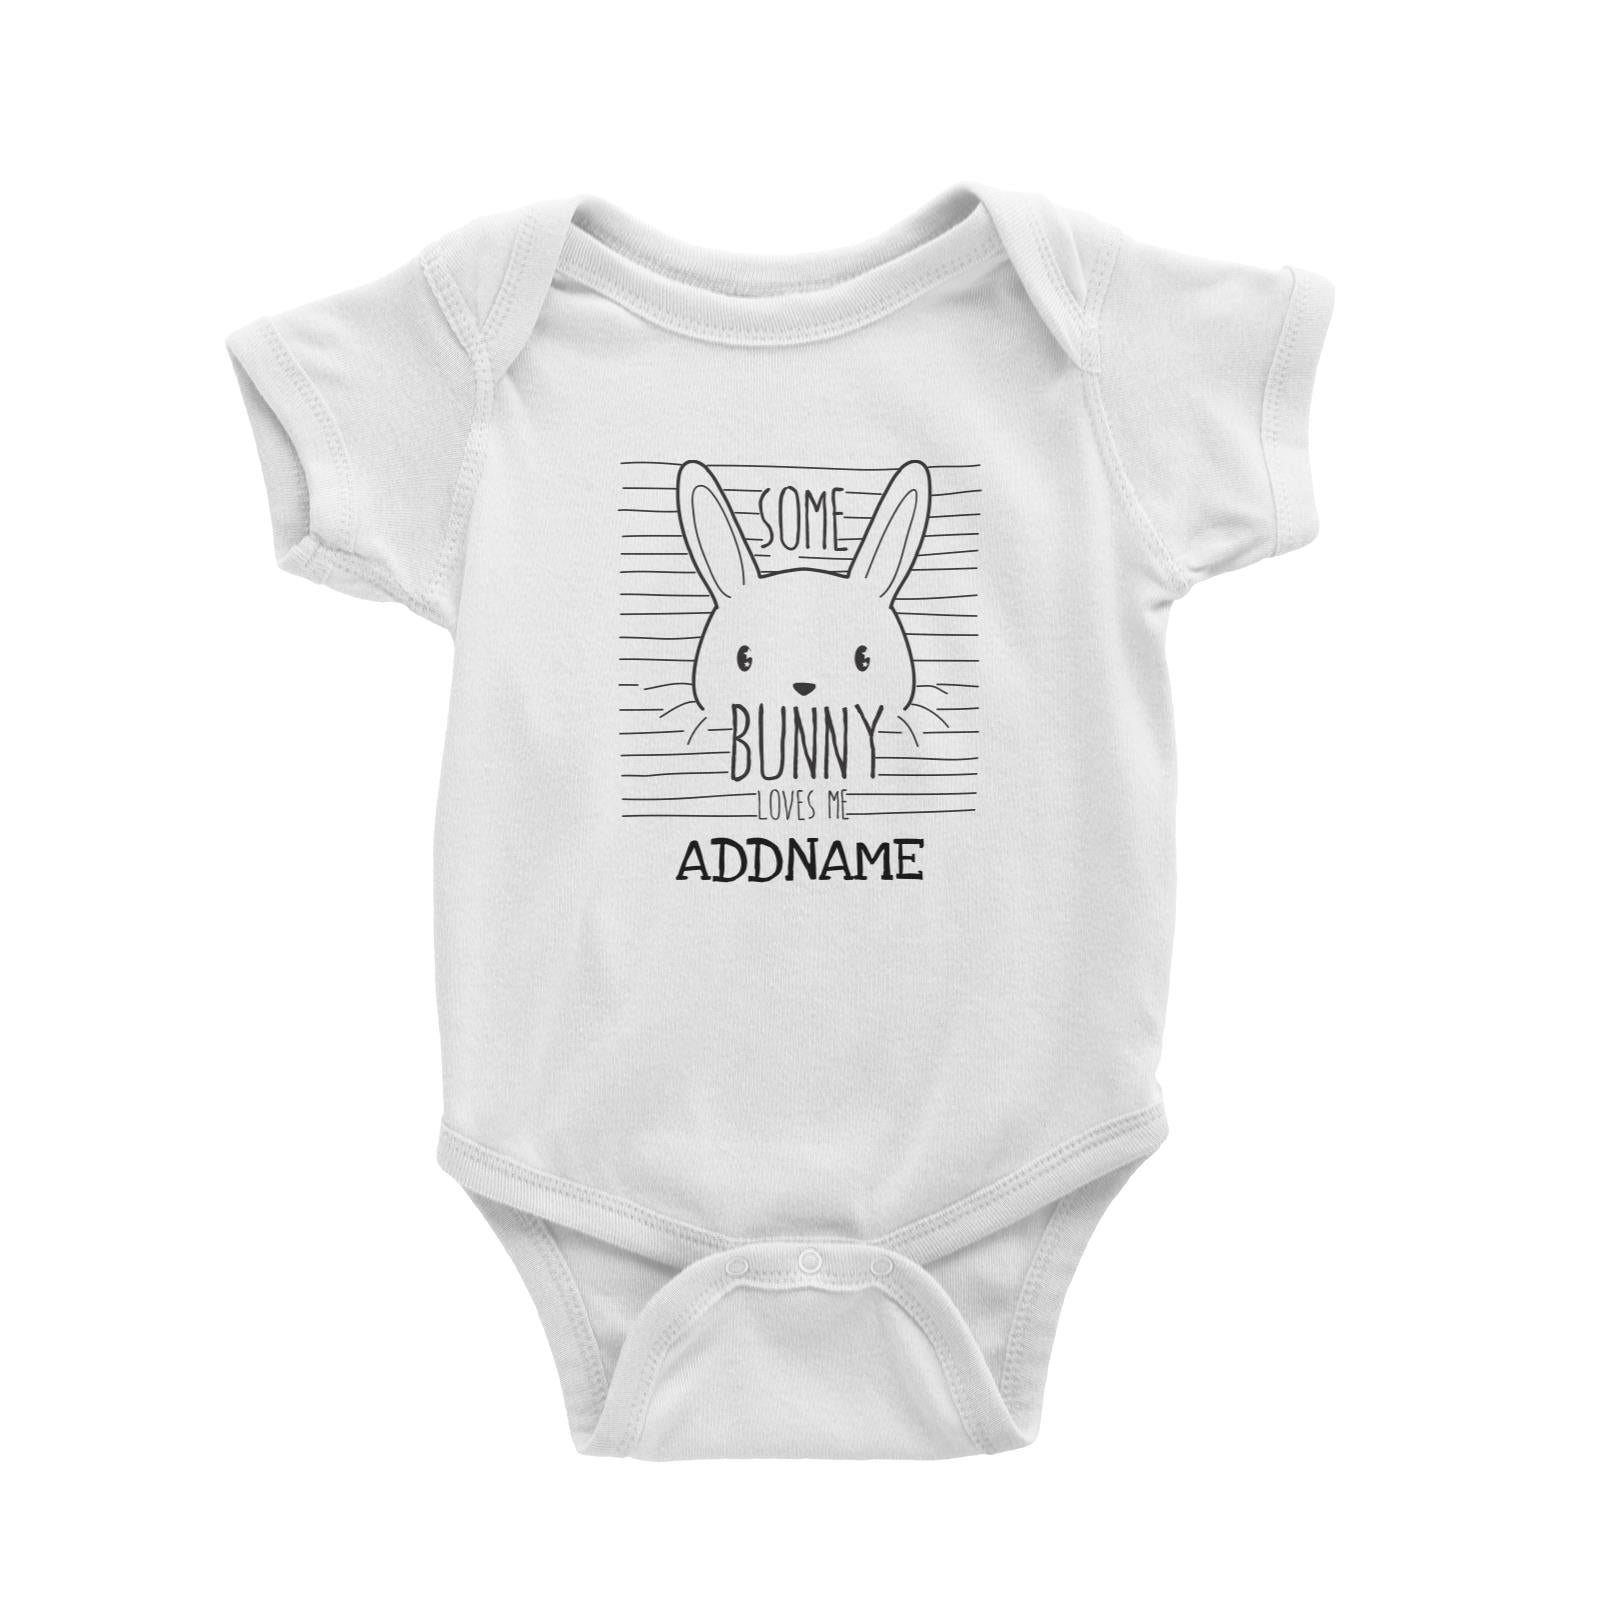 Some Bunny Loves Me Addname White Baby Romper